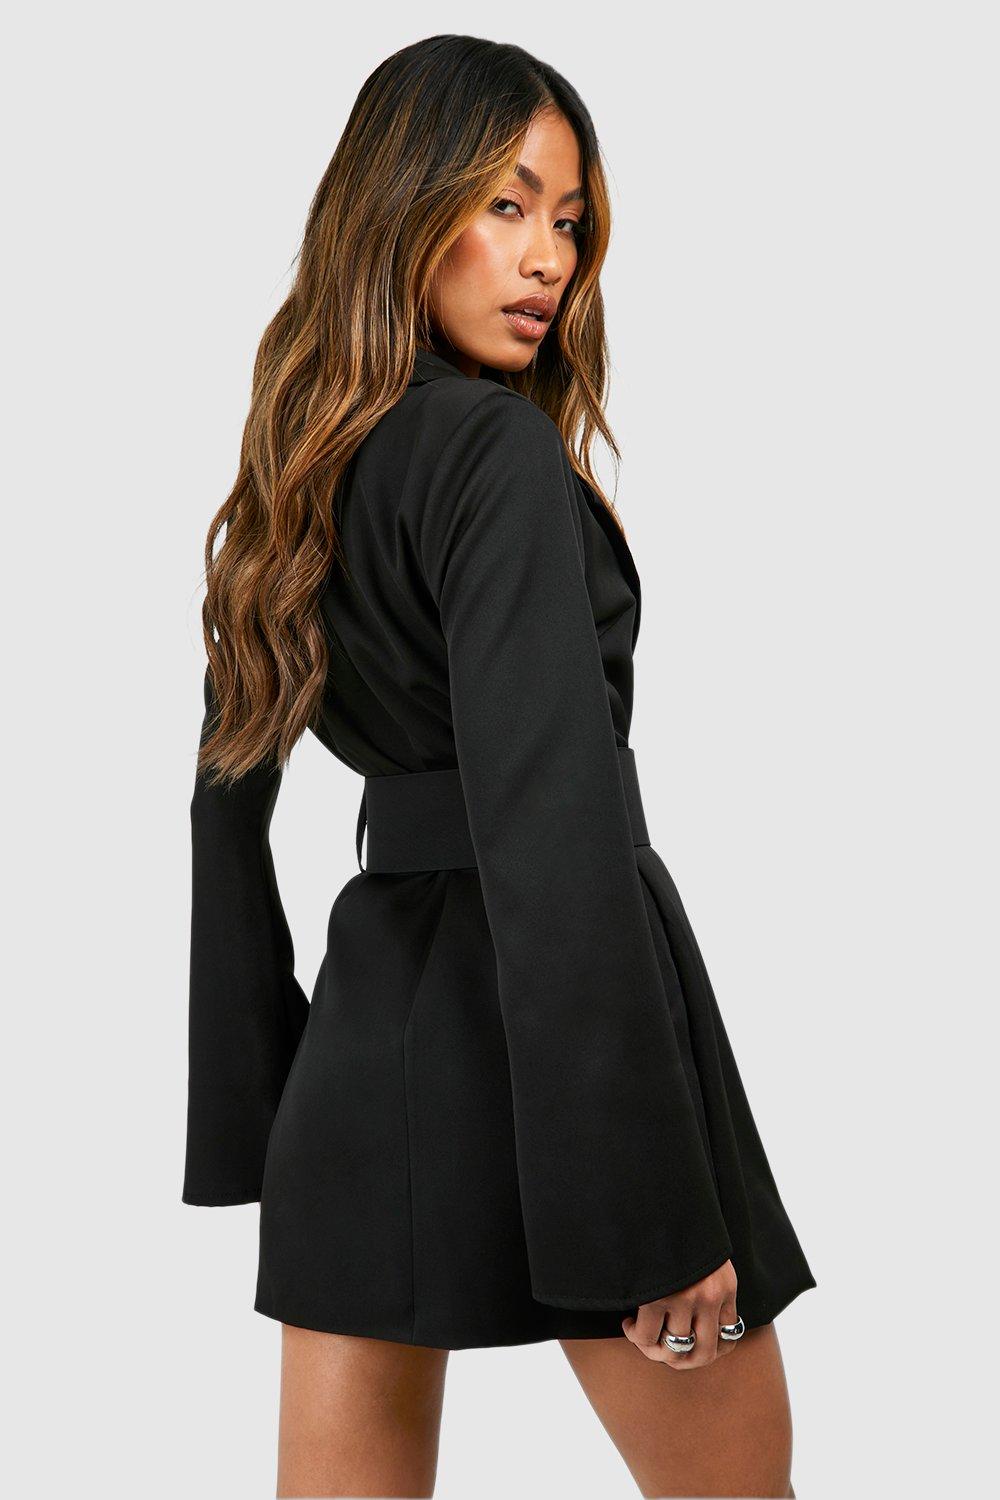 Missguided discount code revealed 50% off - Your Missguided Black